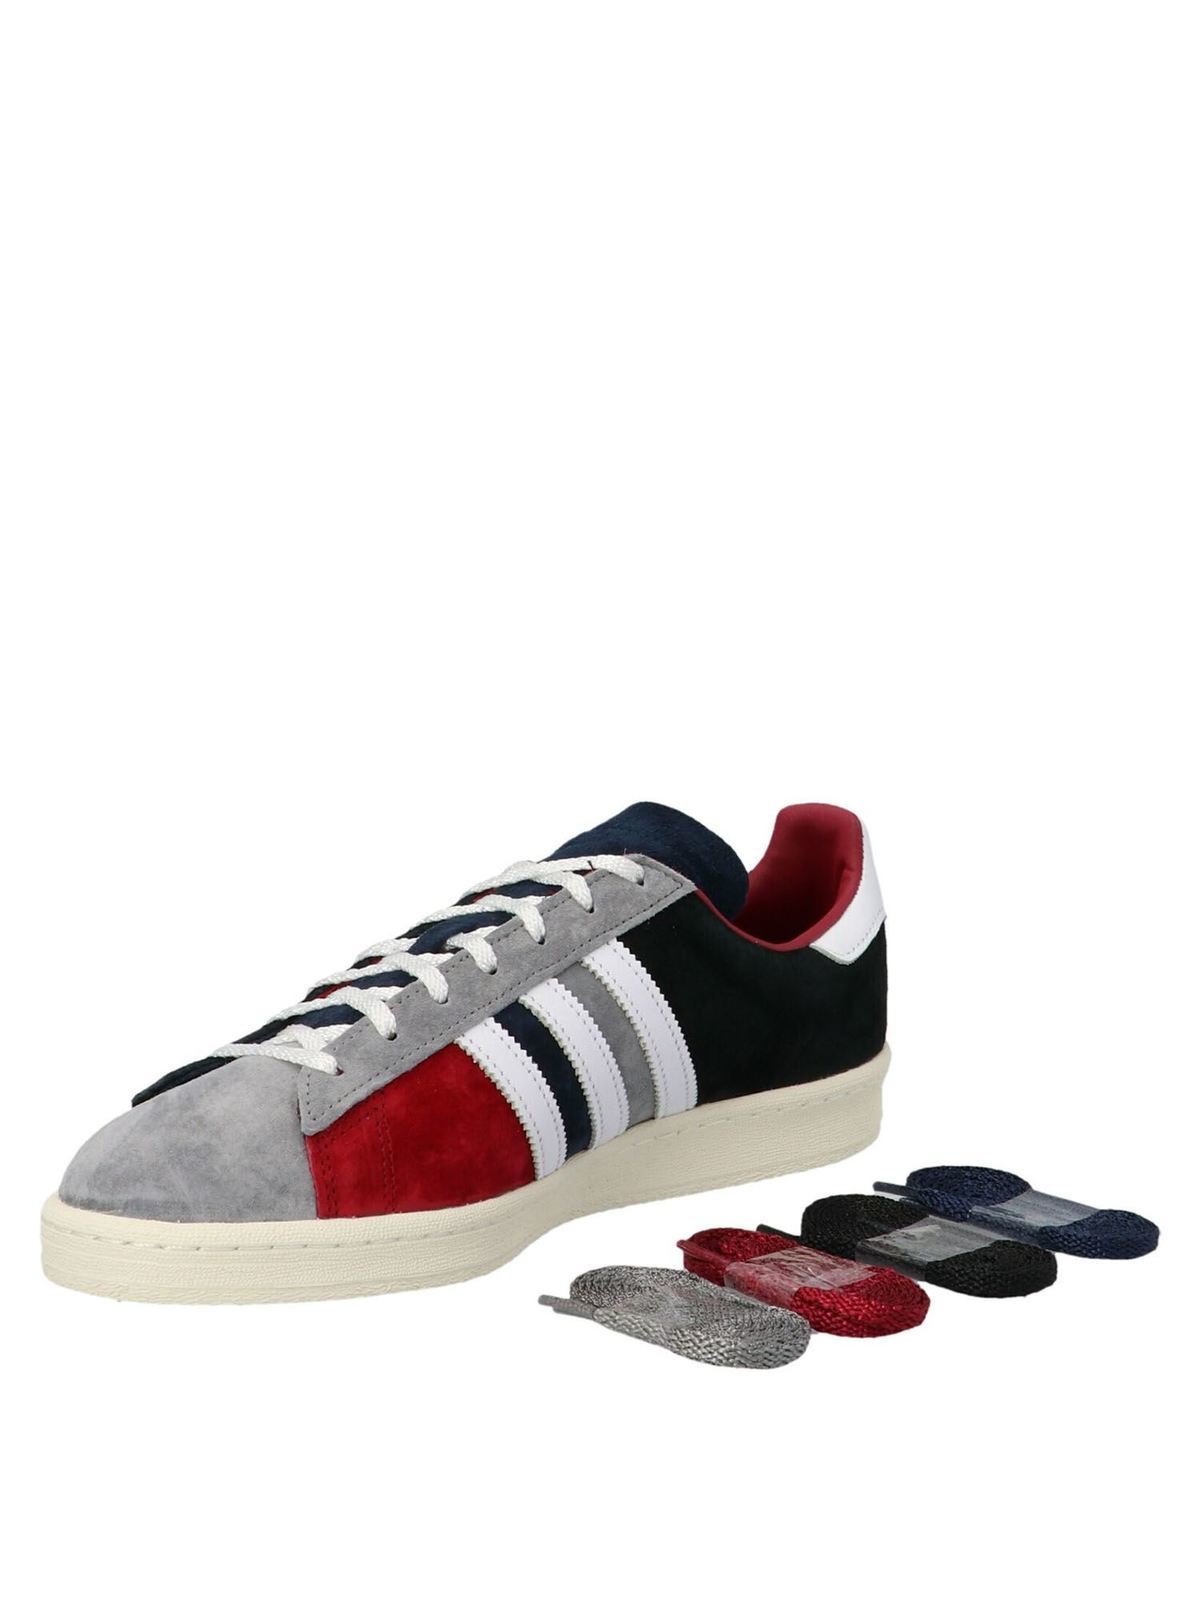 Trainers Adidas Originals - Campus 80 in blue and - FY7152